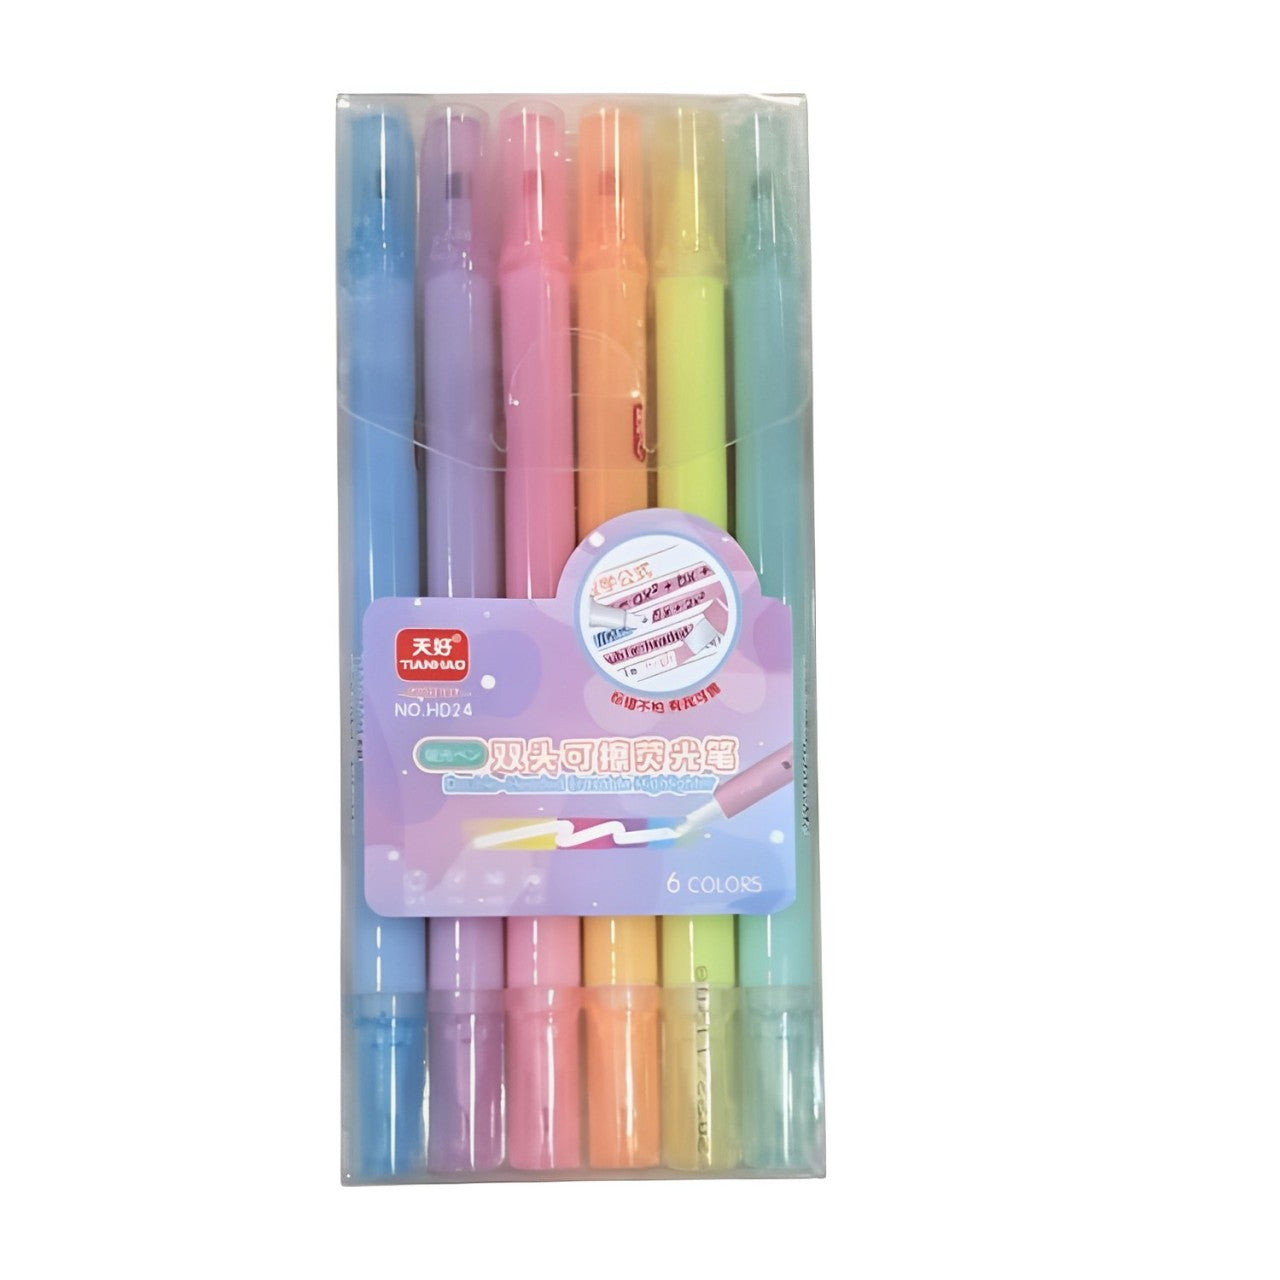 Highlighters | Double Headed Erasable Marker Pen Hi-lighters - for Girls, Boys, School, Crafts, Drawing, Birthday Gift & Return Gifts - Apkamart #Style_pack of 1